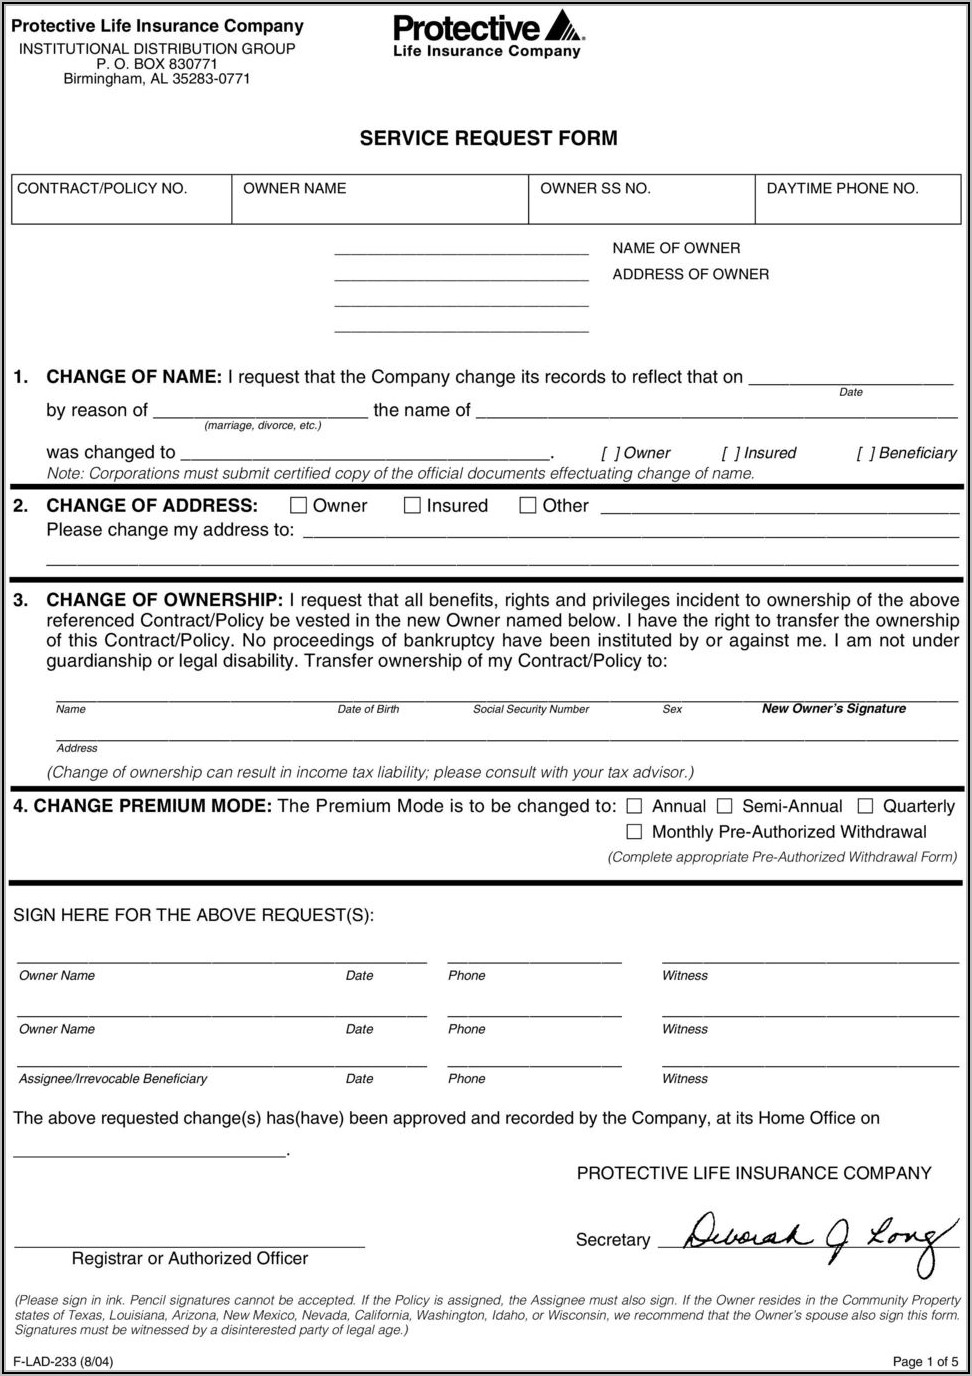 Hartford Life And Annuity Insurance Company Change Of Beneficiary Request Form